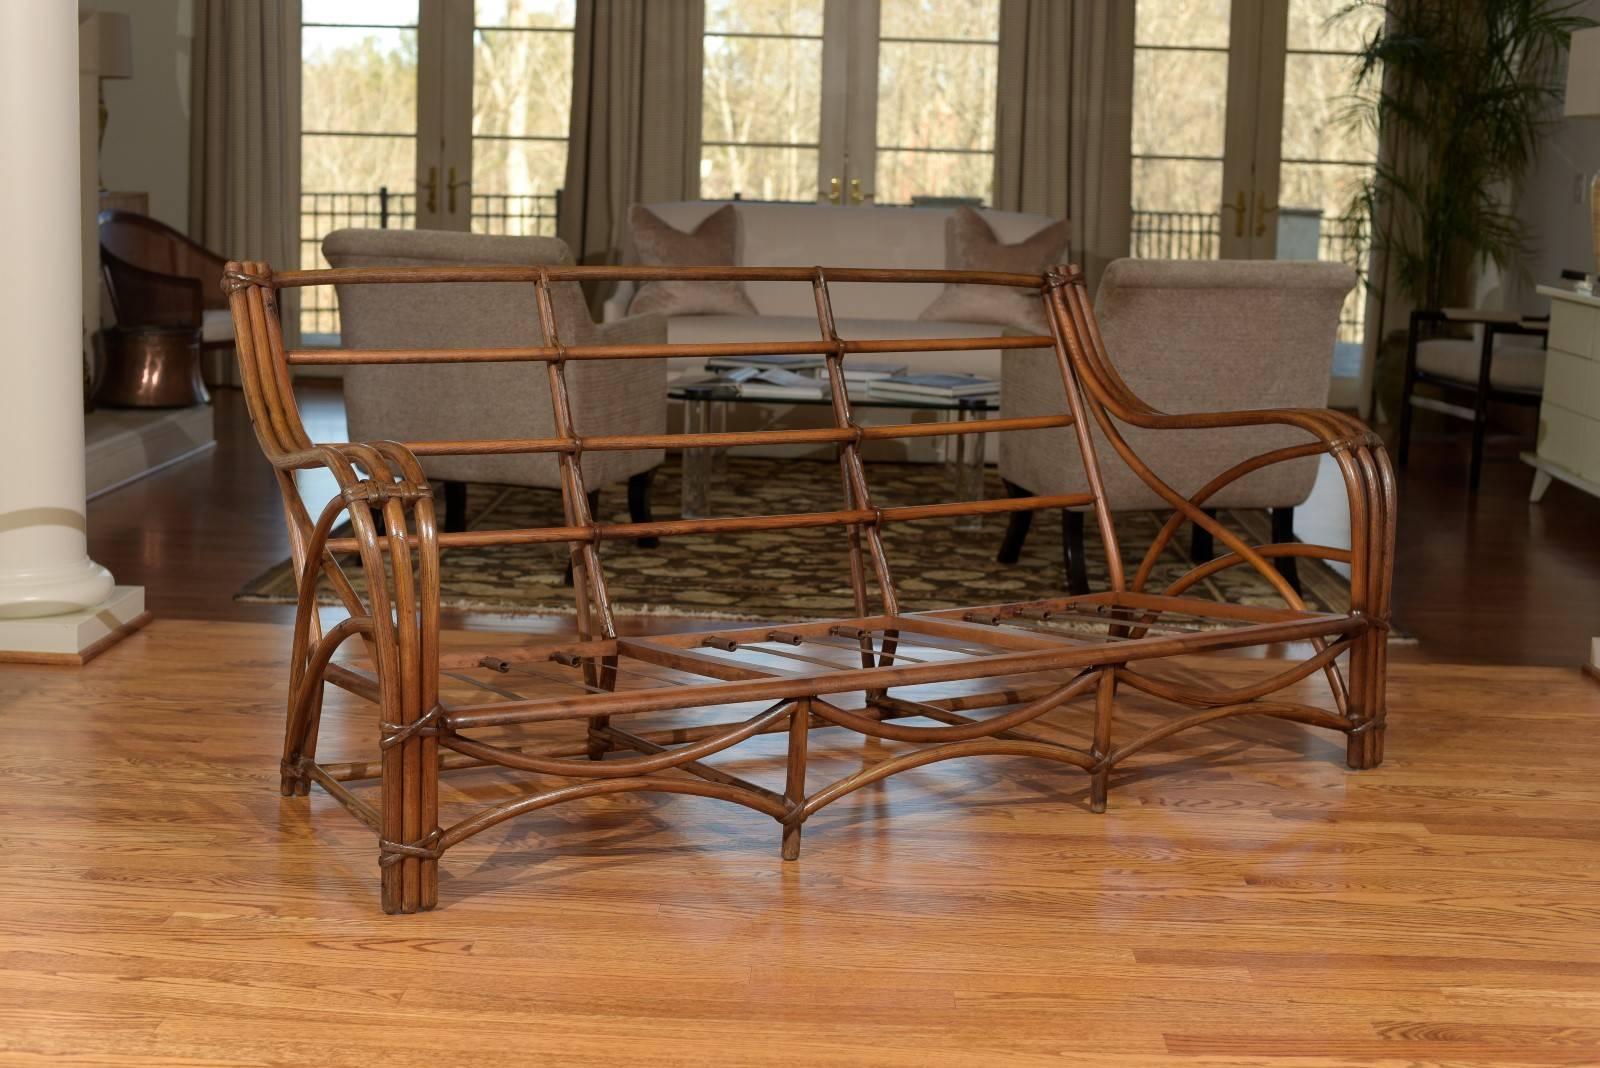 A beautiful and unusual sofa, circa 1950. Designed to give the appearance of rattan, the frame is actually made from bent oak. Sofa bindings and detail are in rattan. Stout and exceptionally crafted. The unmistakable look of old money. The matching